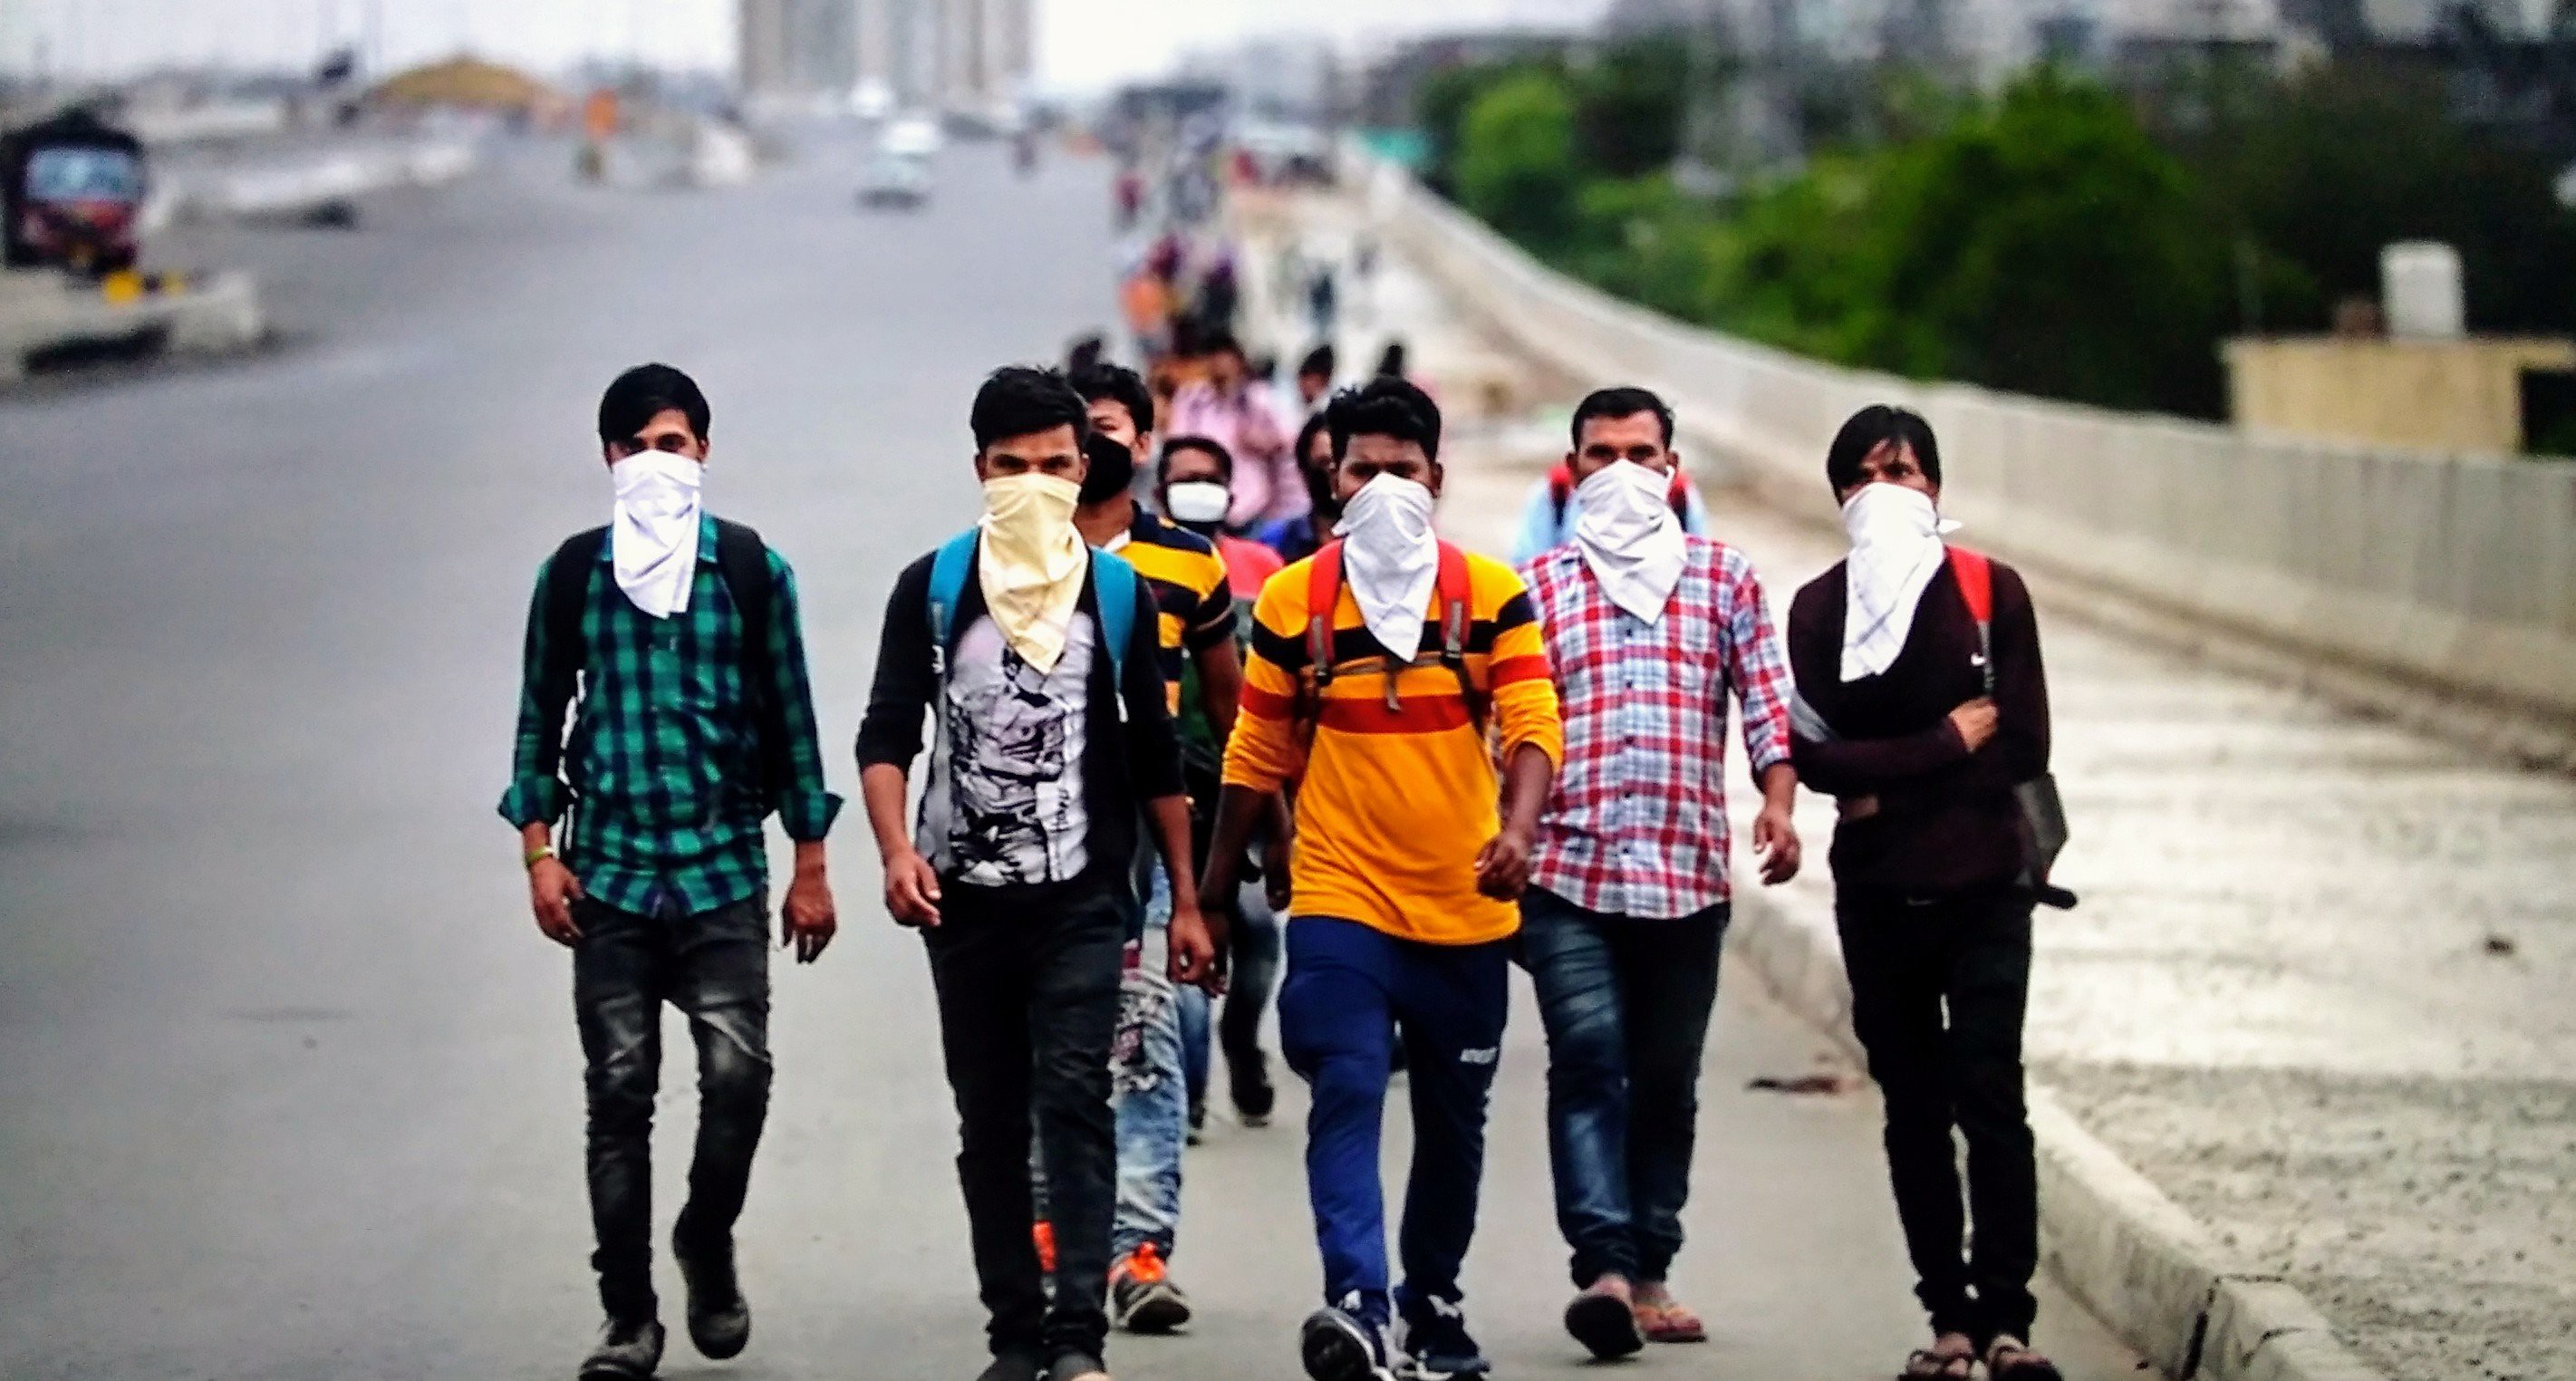 Men with face masks walking down a highway.